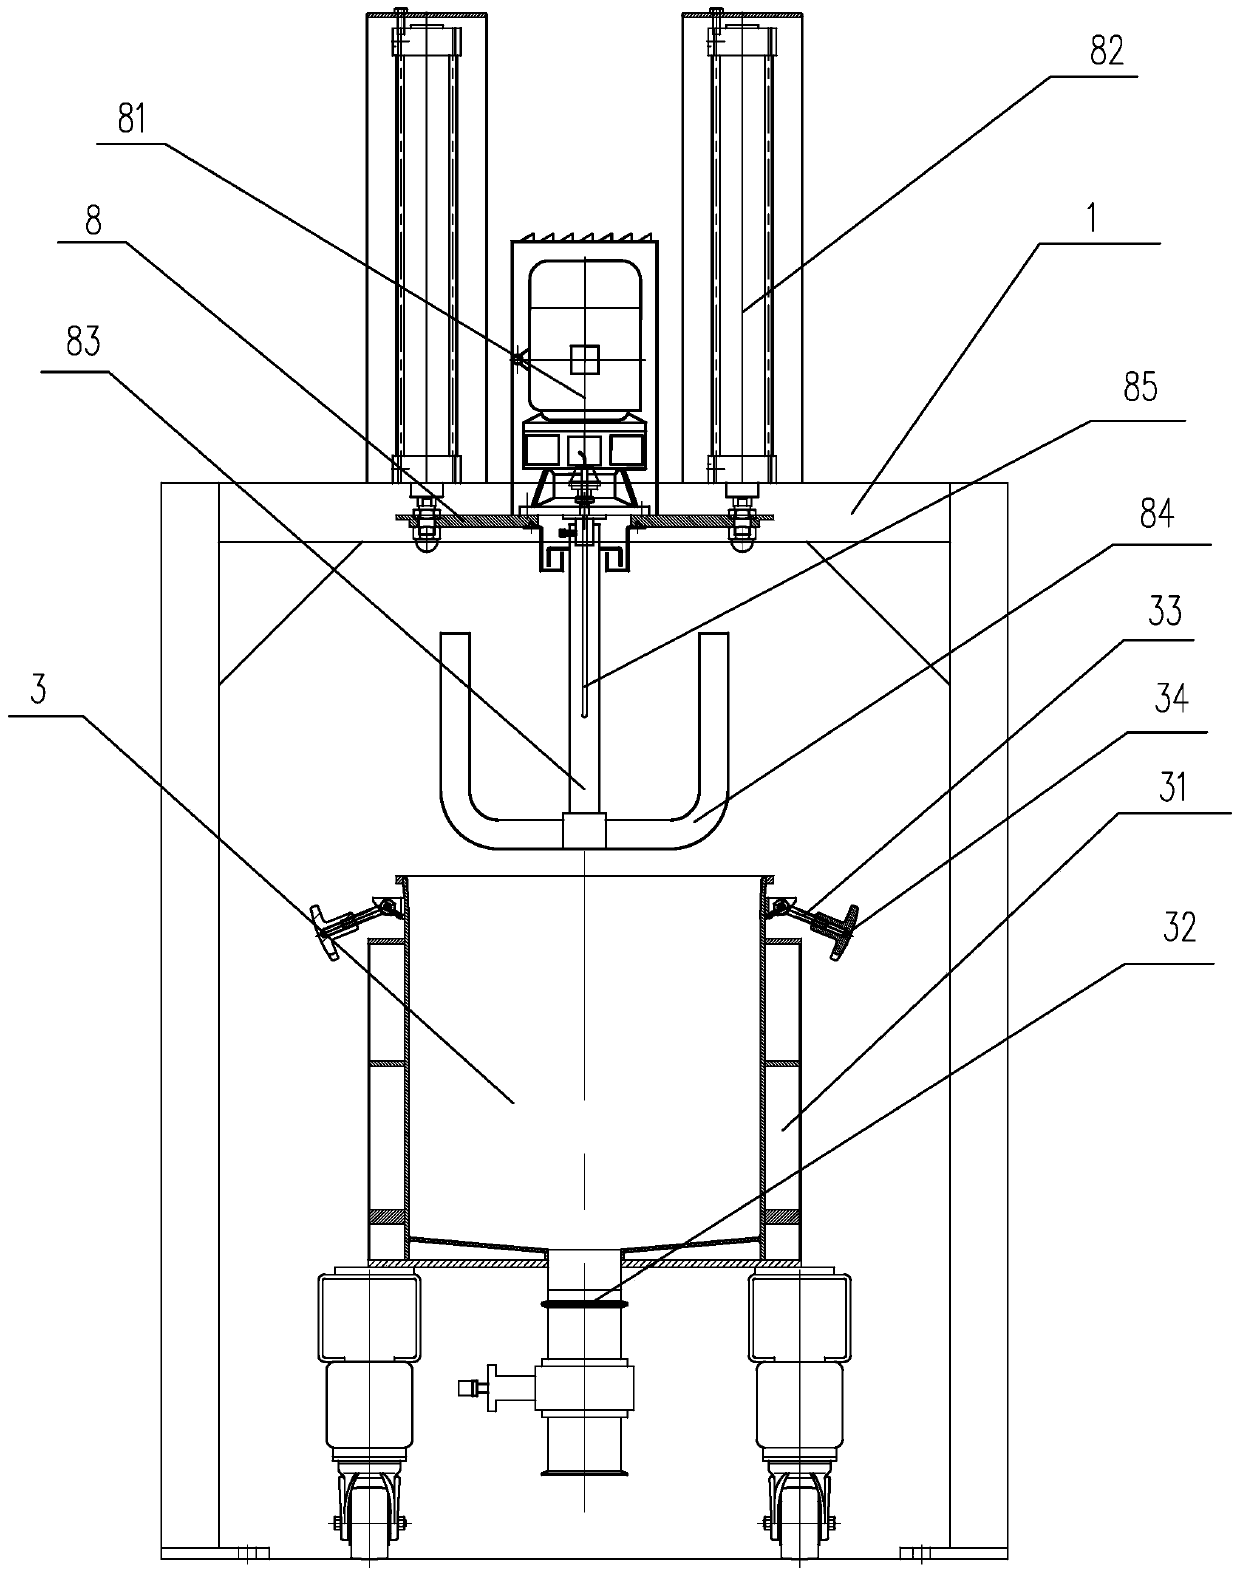 Pulp mixing device